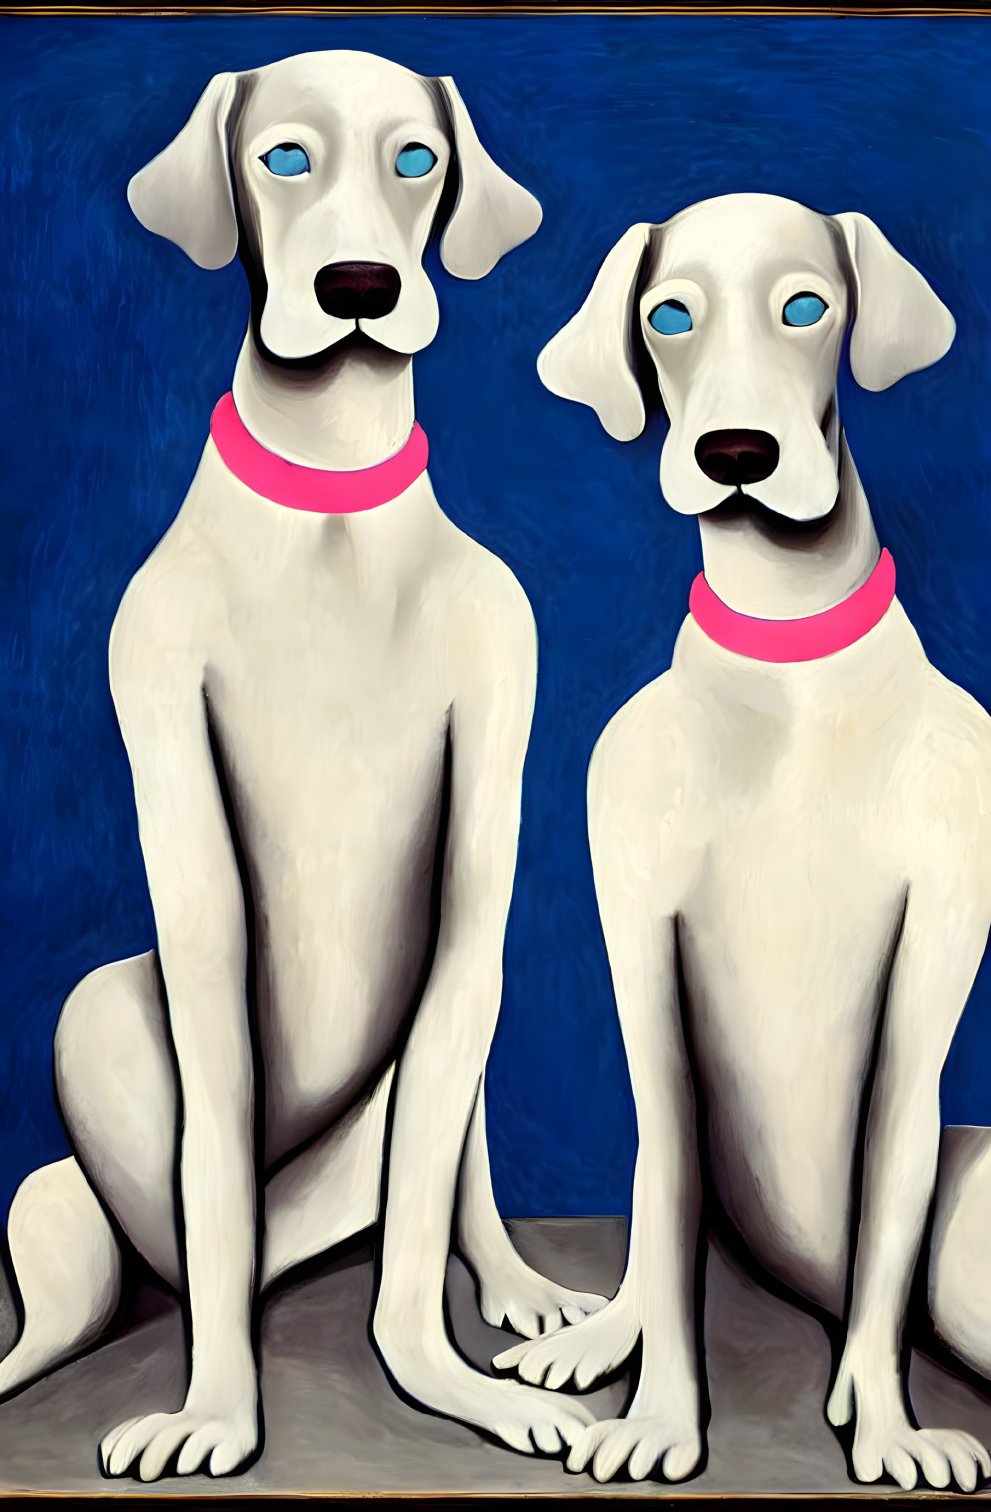 Stylized white dogs with pink collars on blue background portrait illustration